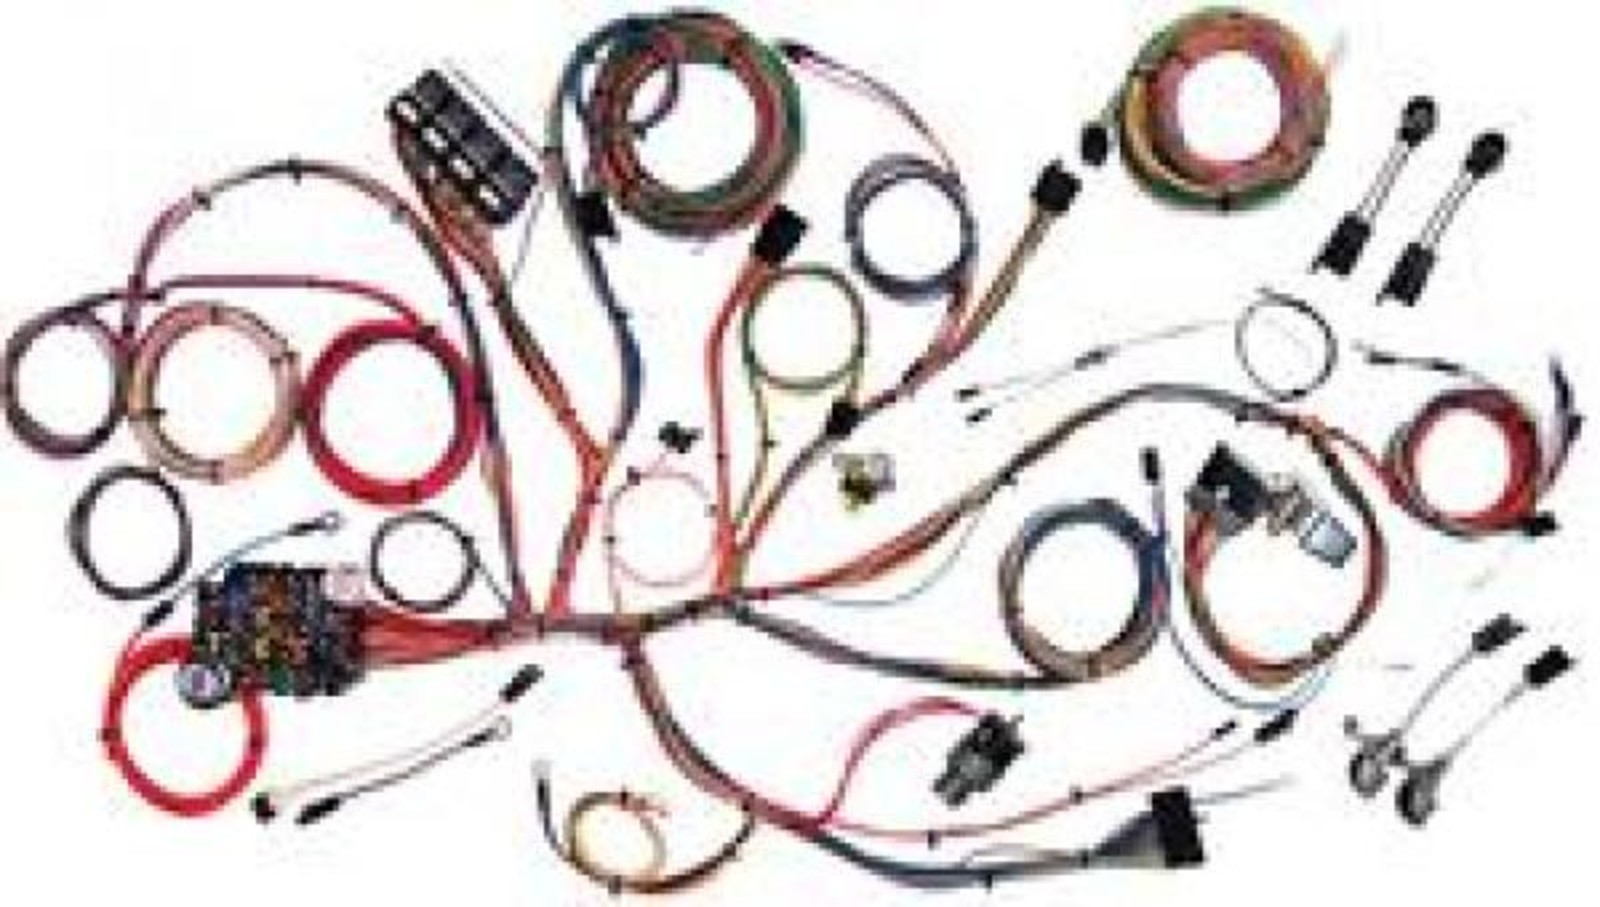 64-66 American Autowire kit